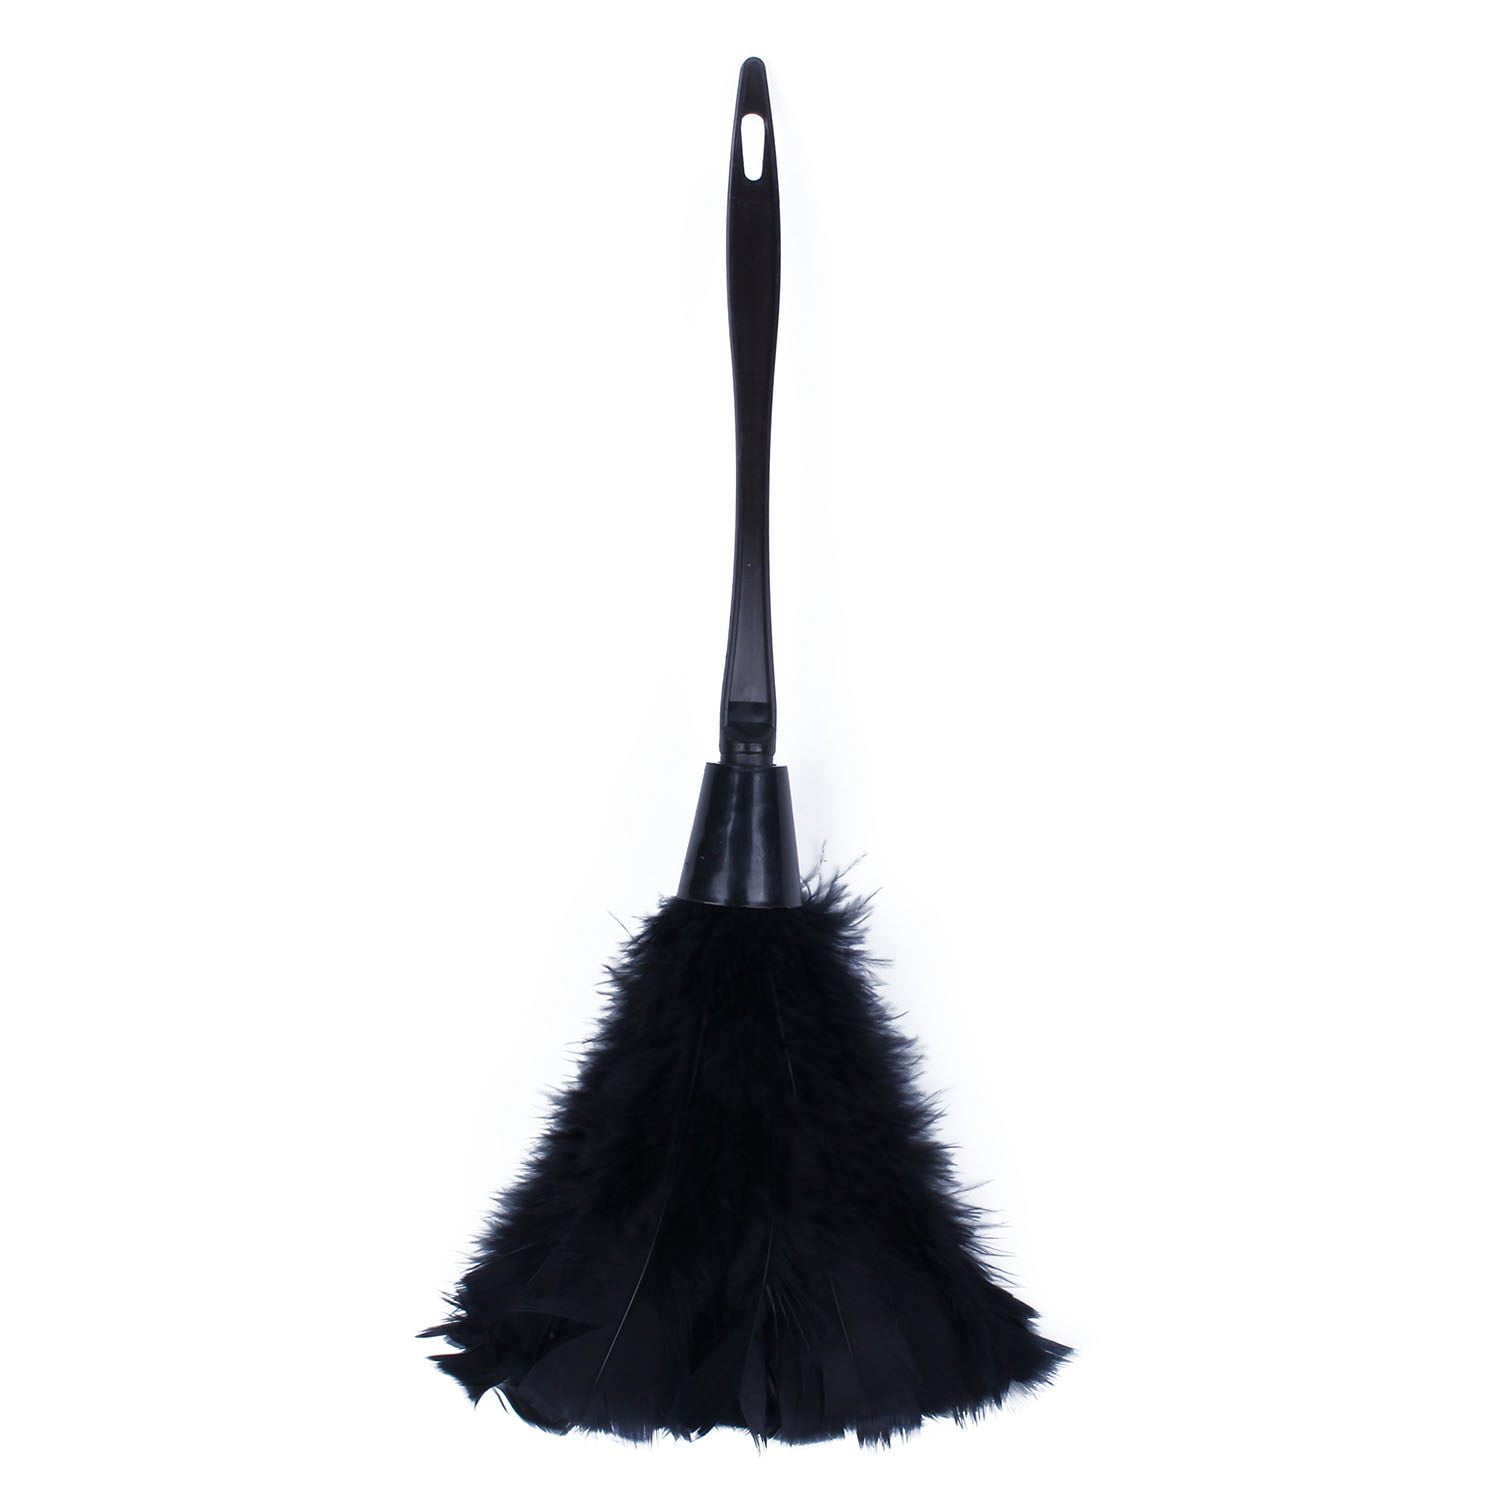 Anti-static Plastic Handle Turkey Feather Duster Cleaner Tools Home Cleaning 